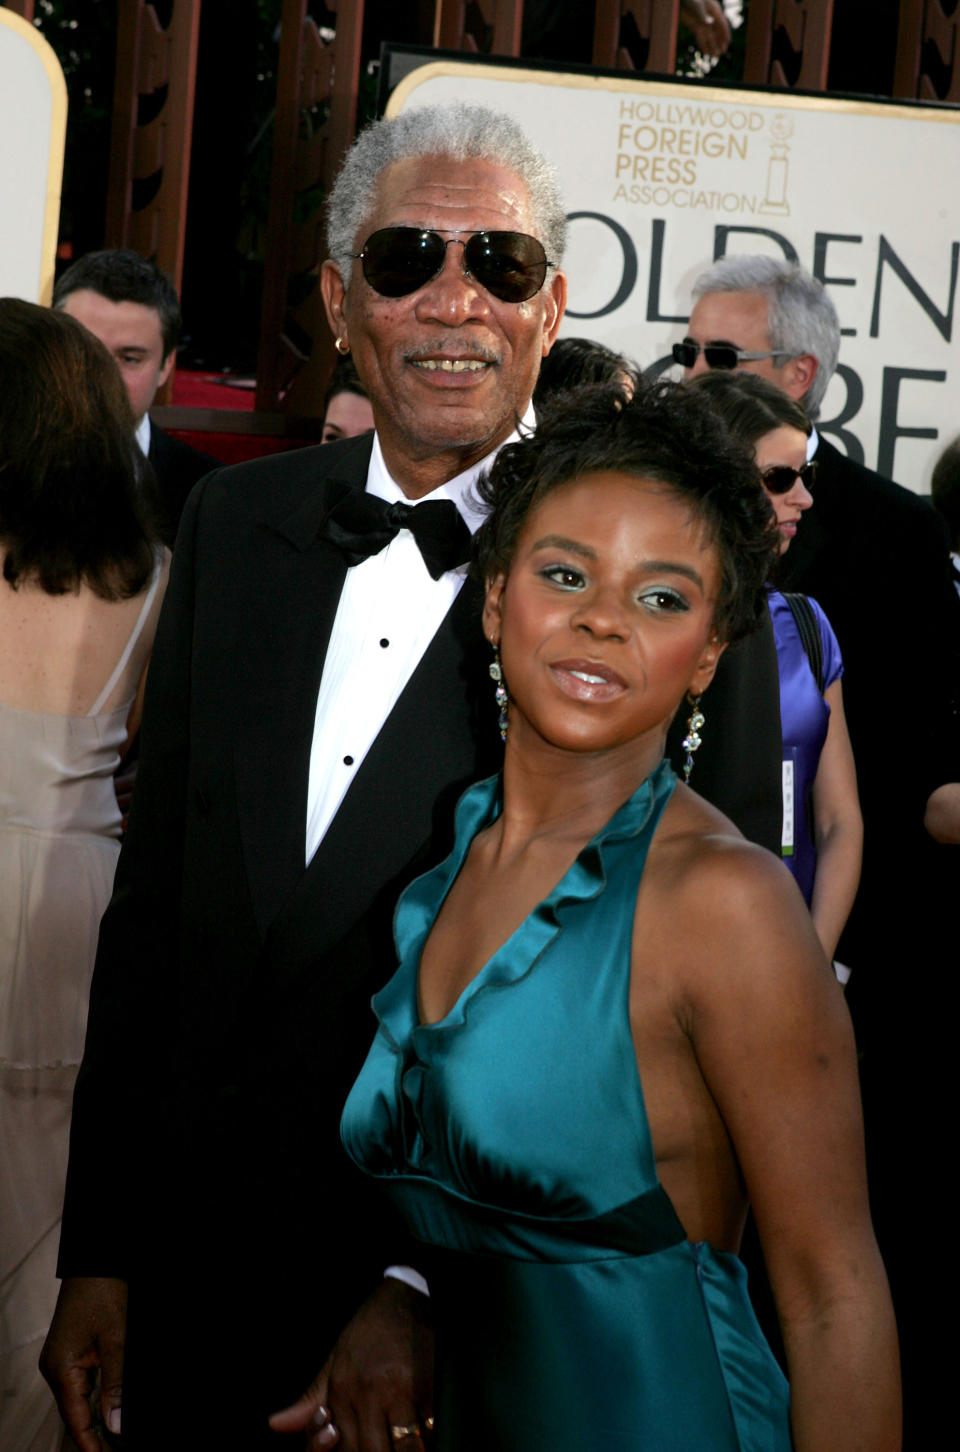 Freeman with E’Dena Hines at the 2005 Golden Globe Awards. Source: Getty